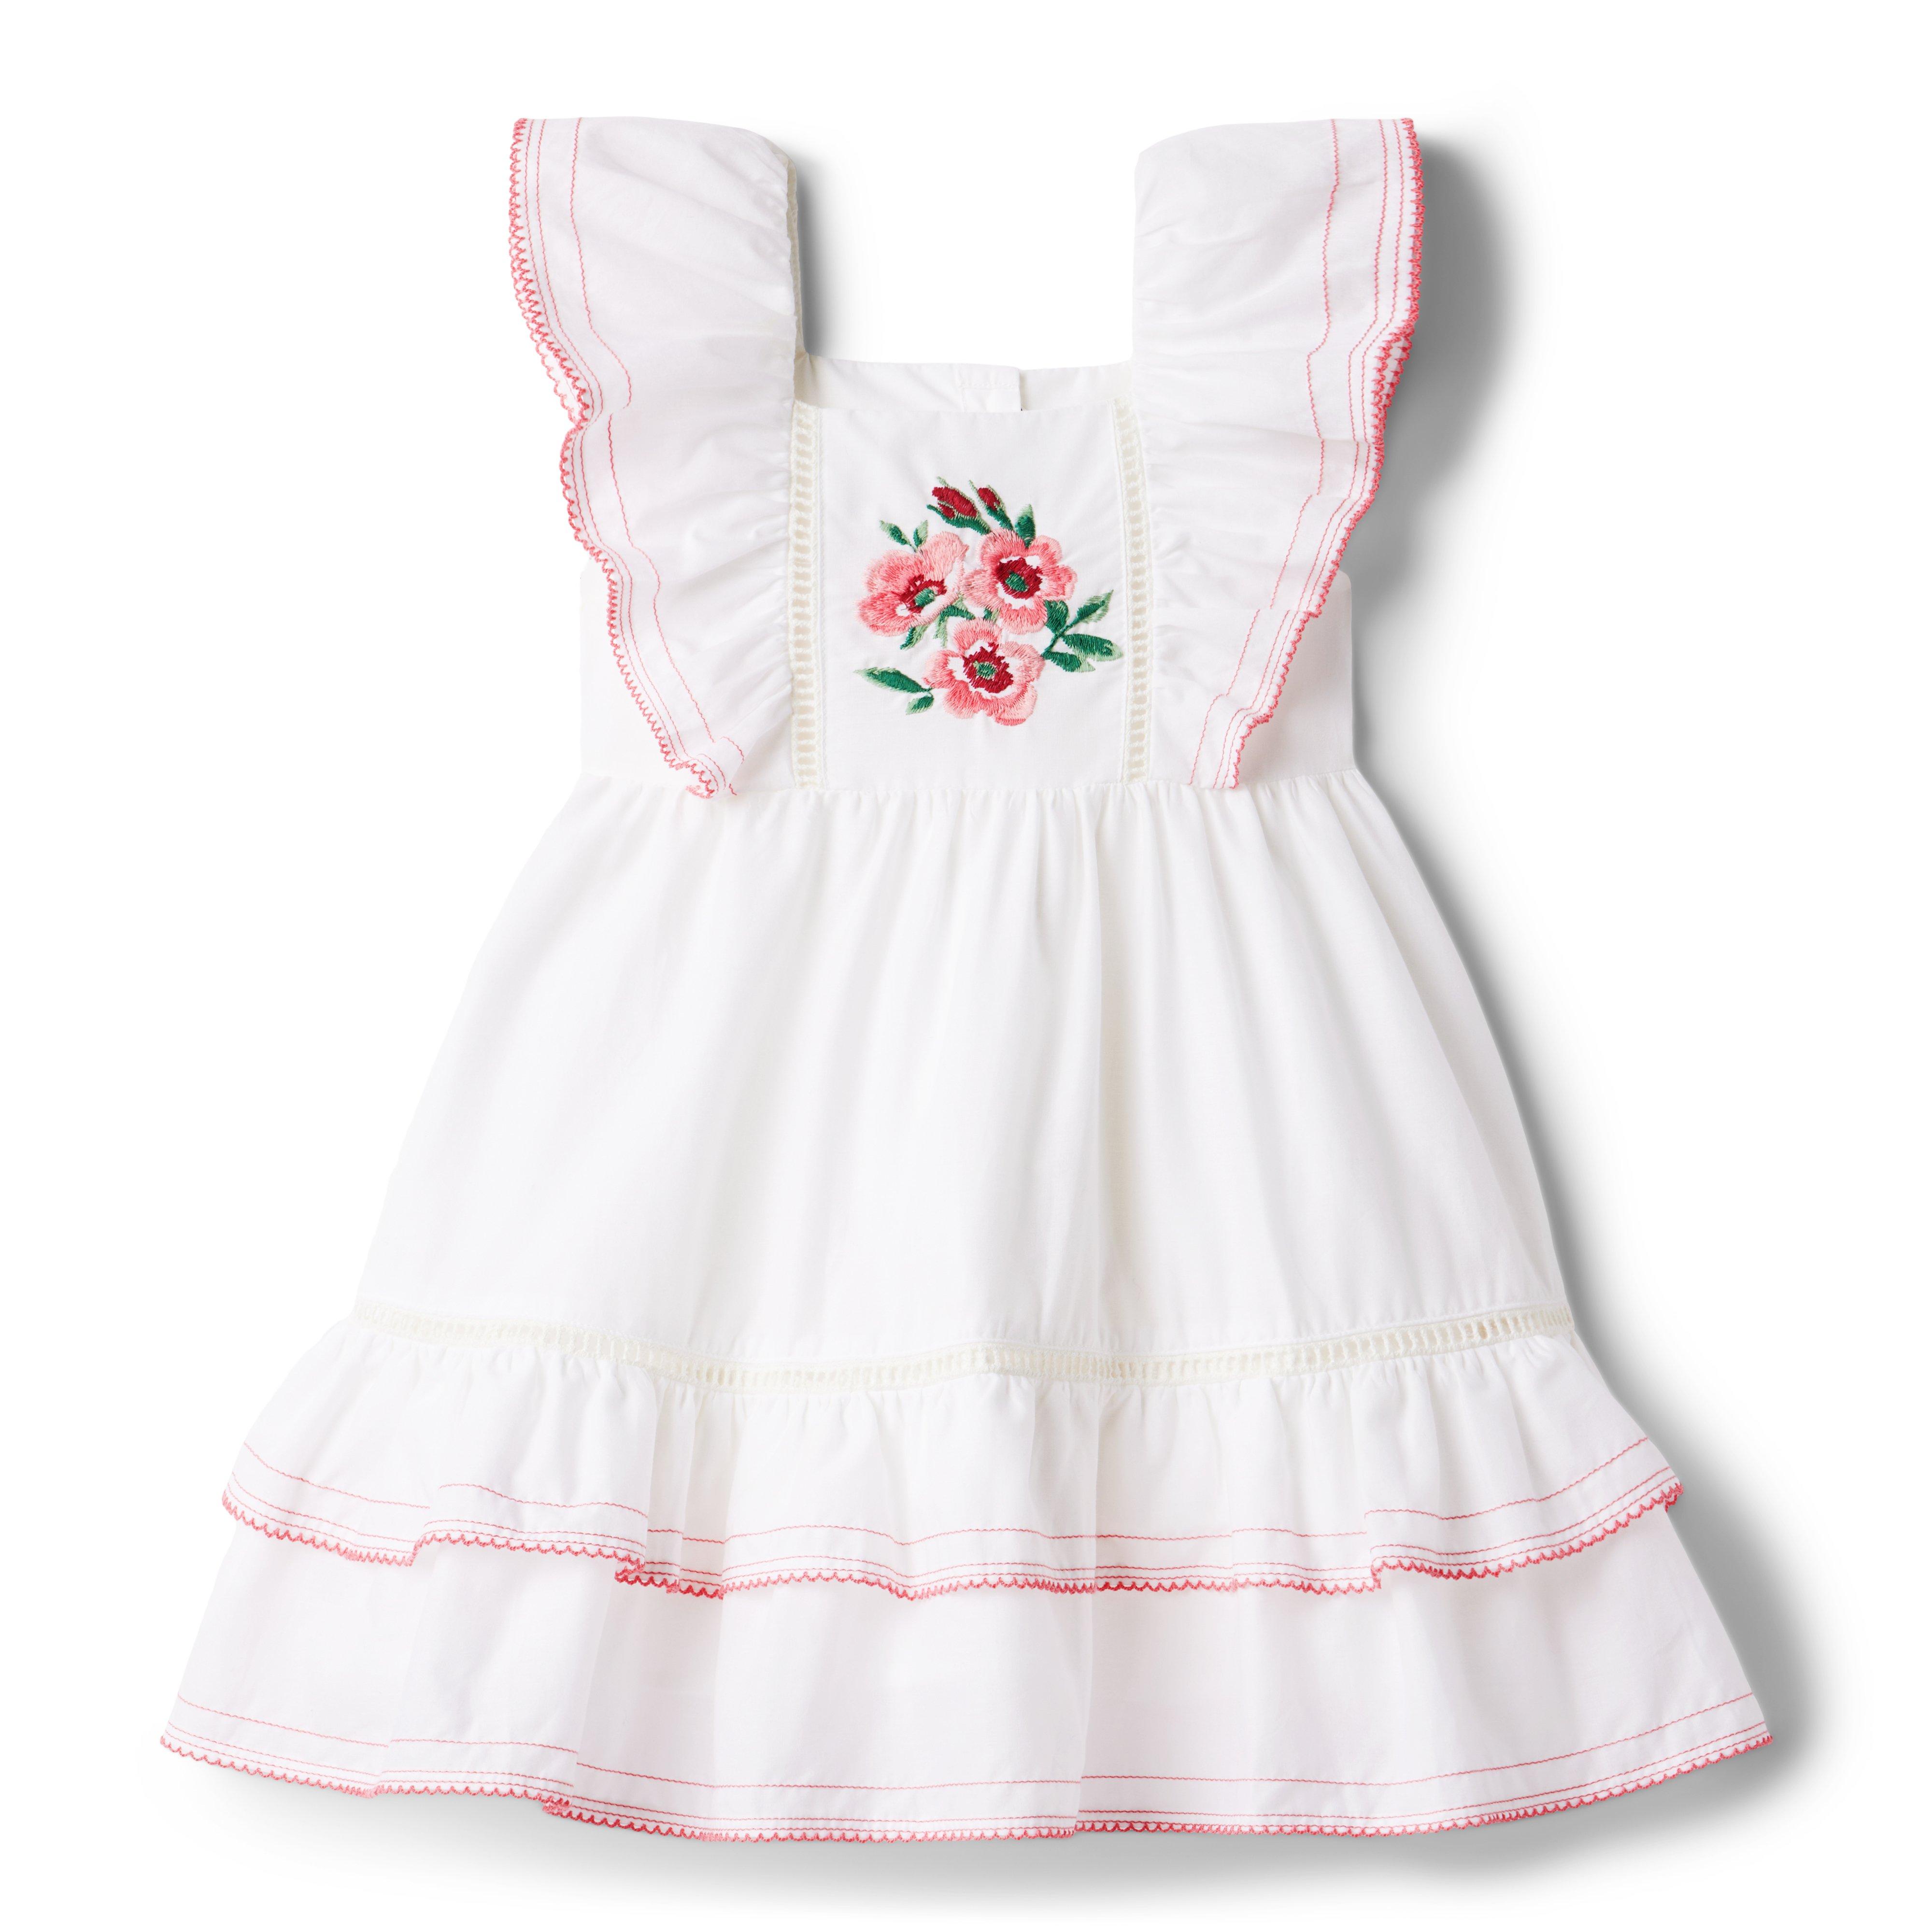 Embroidered Floral Ruffle Dress